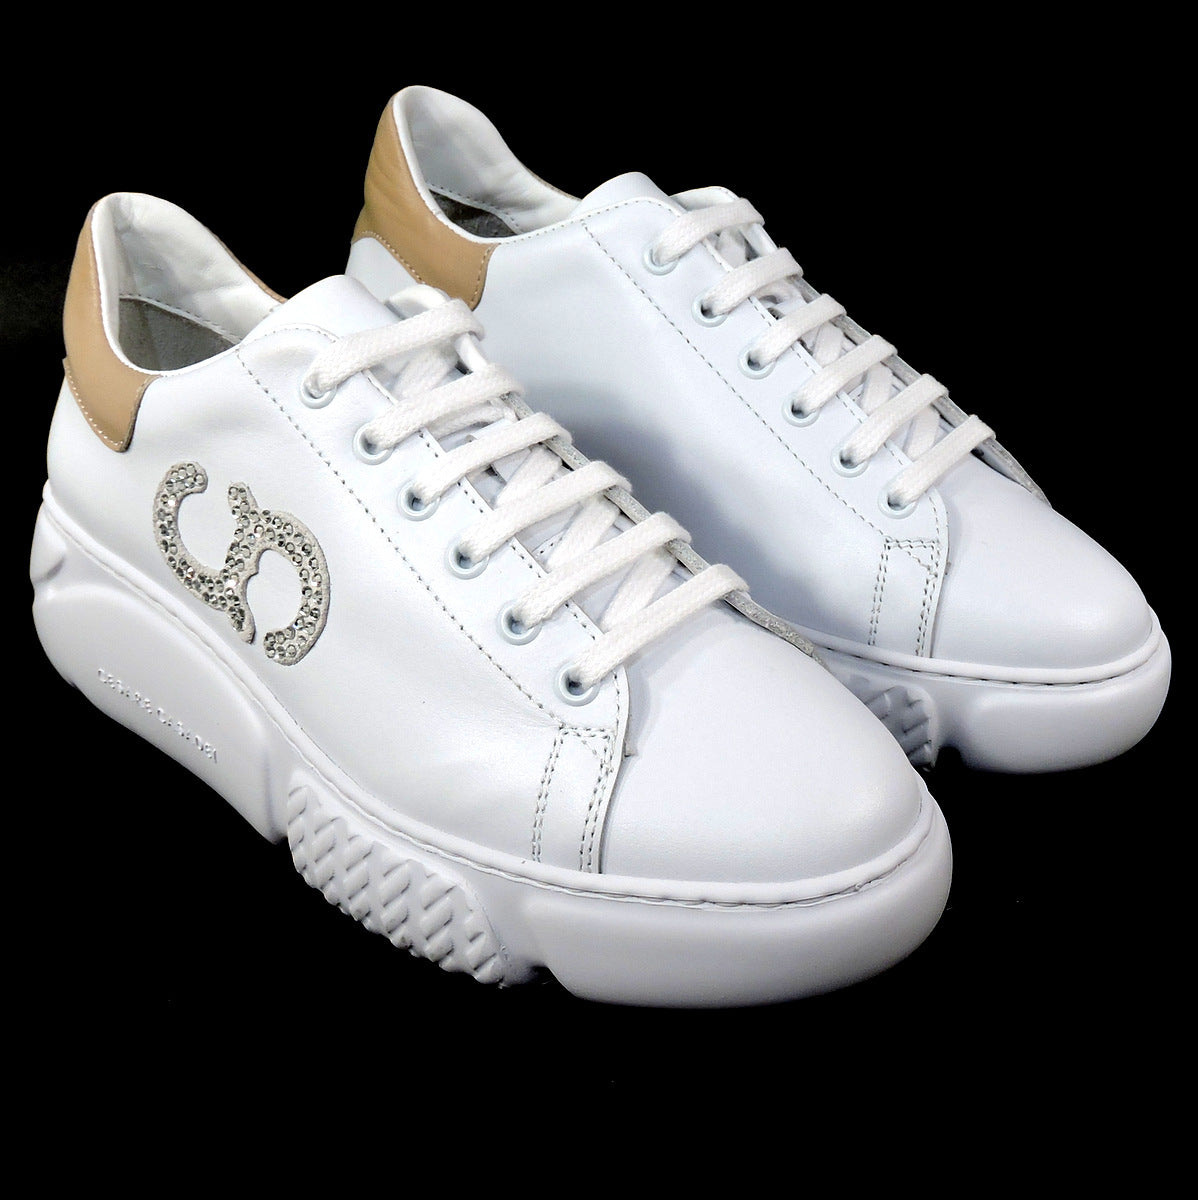 CASADEI 🇮🇹 WOMEN'S WHITE SOFT LEATHER COMFORT FASHION SNEAKERS